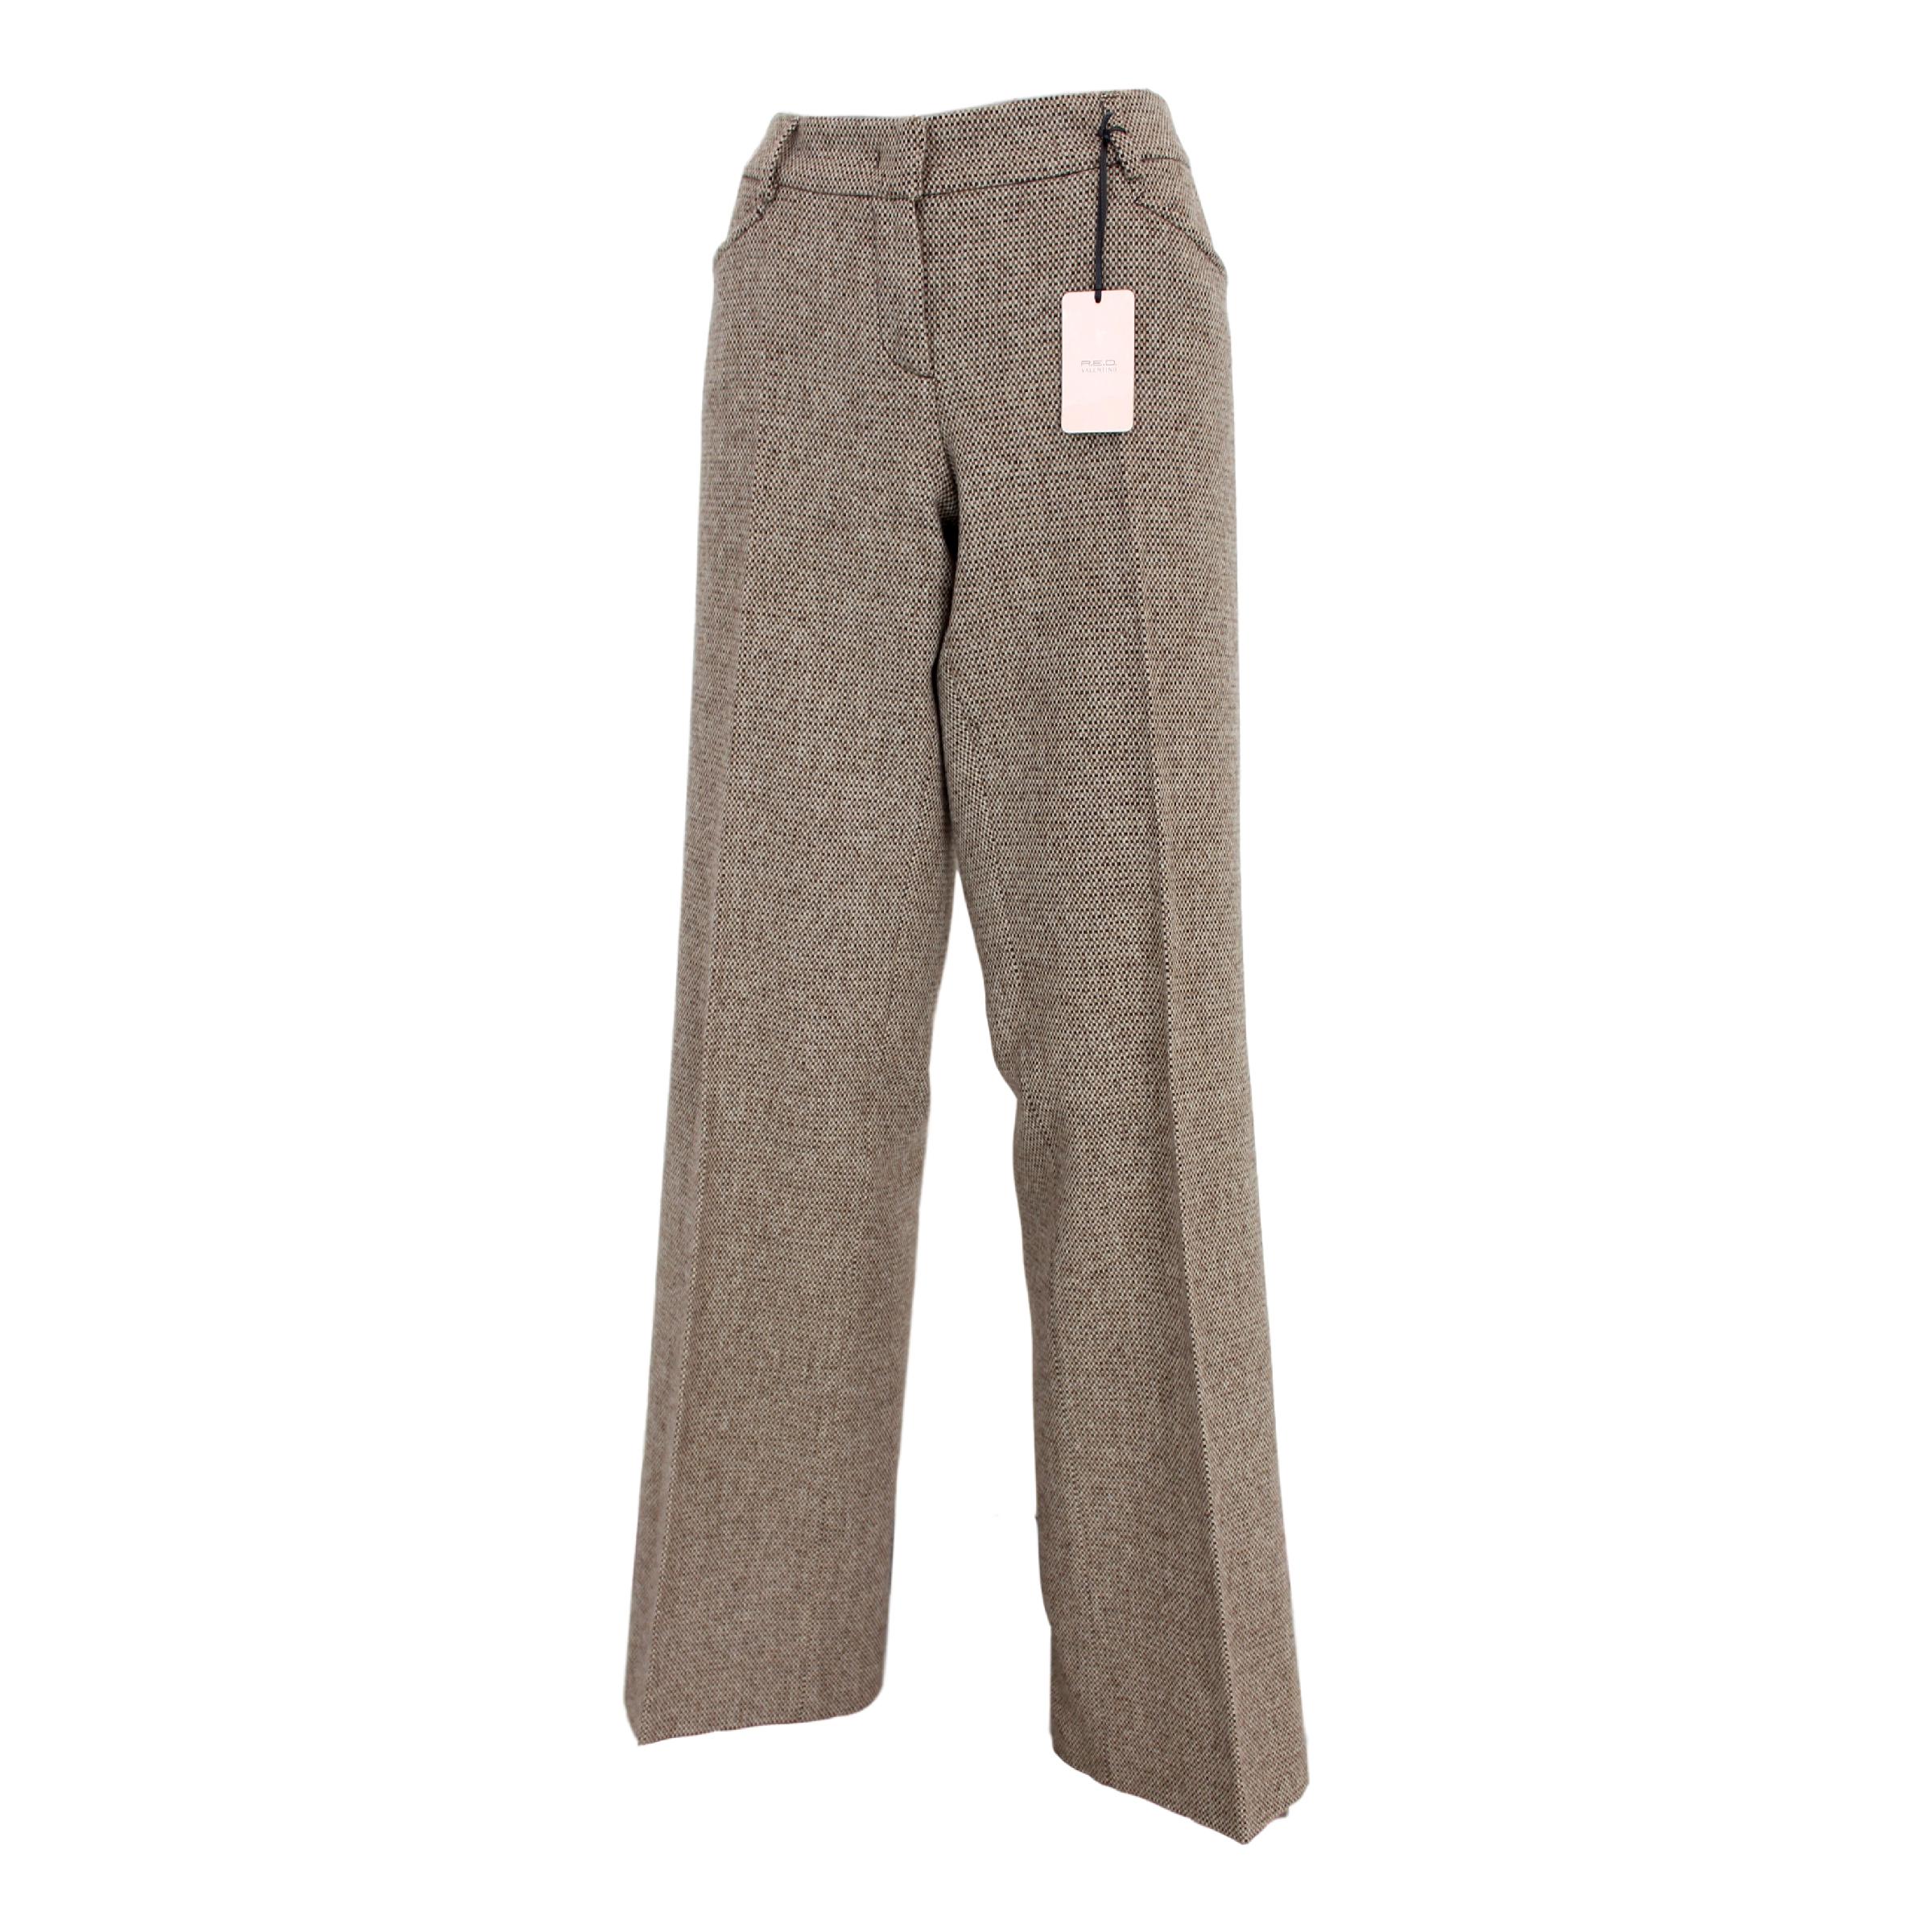 Red Valentino 90s vintage women's trousers. Wide palace pattern, beige and brown, 100% virgin wool. Made in Italy. New with tag.

Size: 48 It 14 Us 16 Uk

Waist trousers: 45 cm
Length: 111 cm
Hem: 27 cm